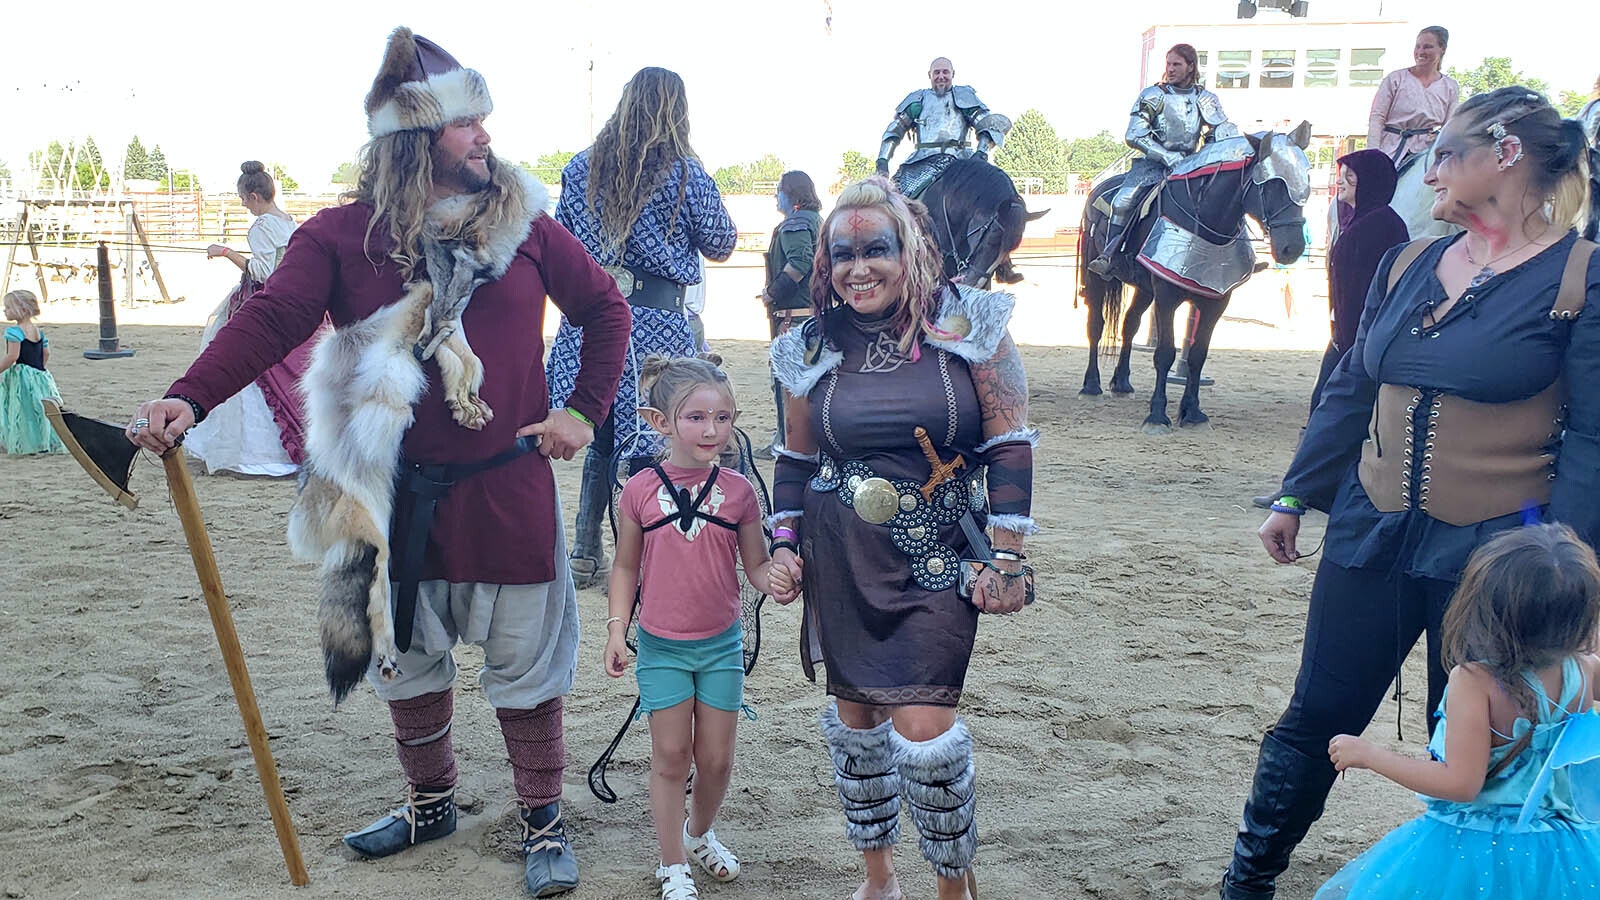 Call La Darna with Crystal Rose dressed as Vikings pose with their elf child Emmy Forman during the parade of costumes at the recent Tournament of Knights in Sheridan.